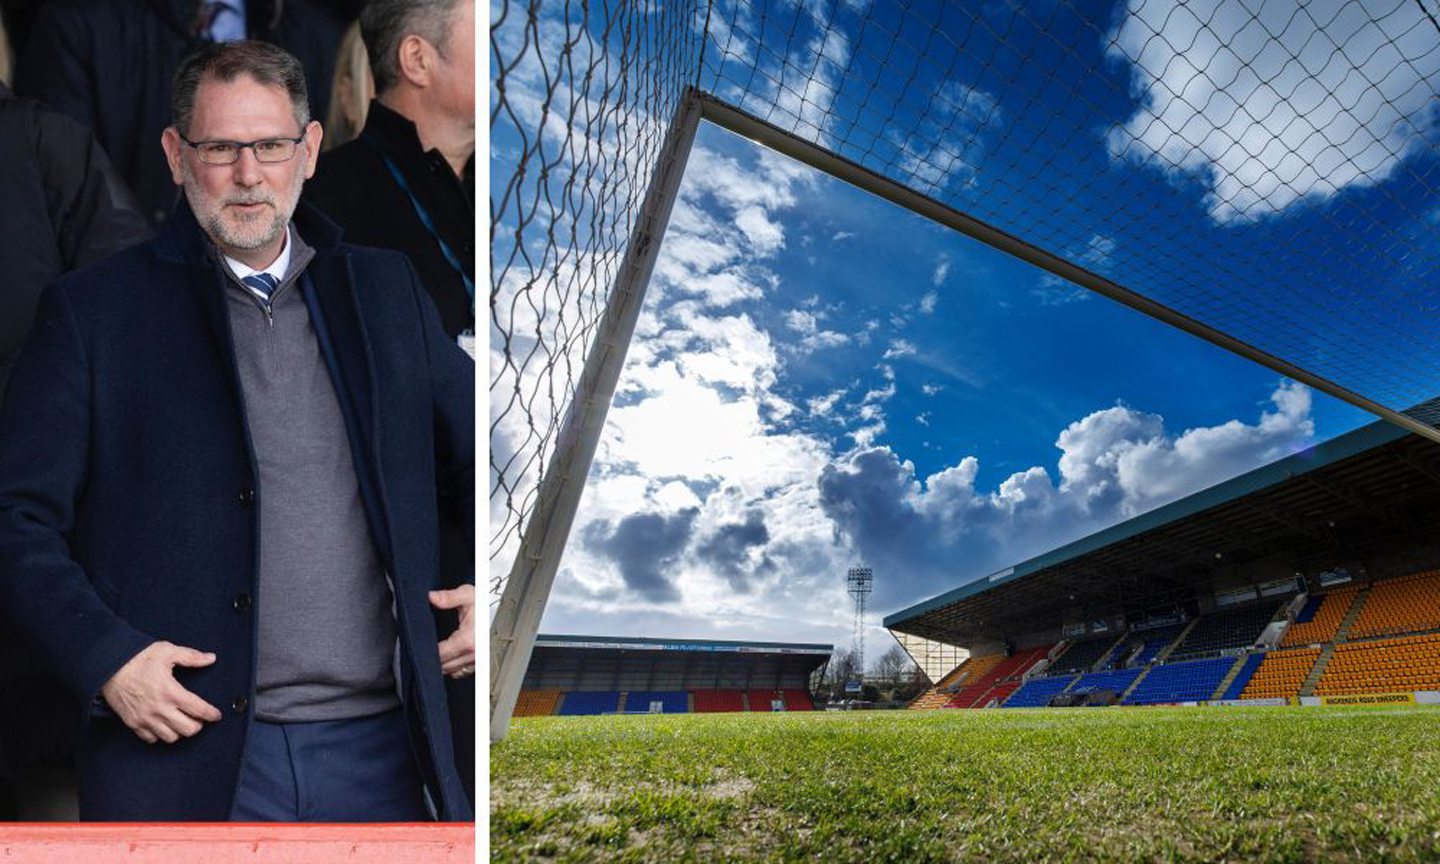 The SPFL will determine whether Dundee have to pay St Johnstone £15,000.